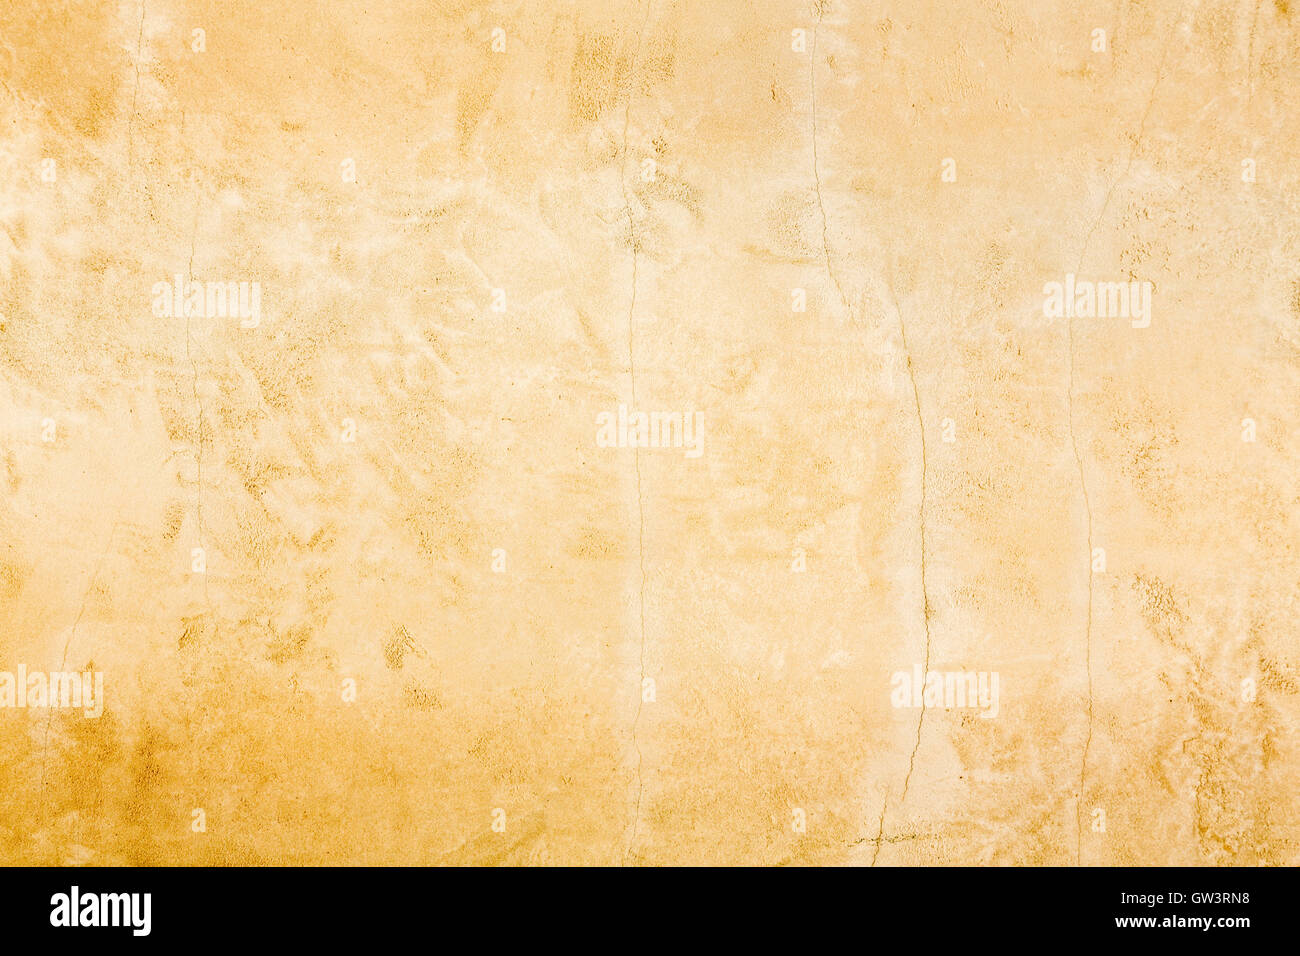 Old Distressed Worn Leather Background Texture Stock Photo